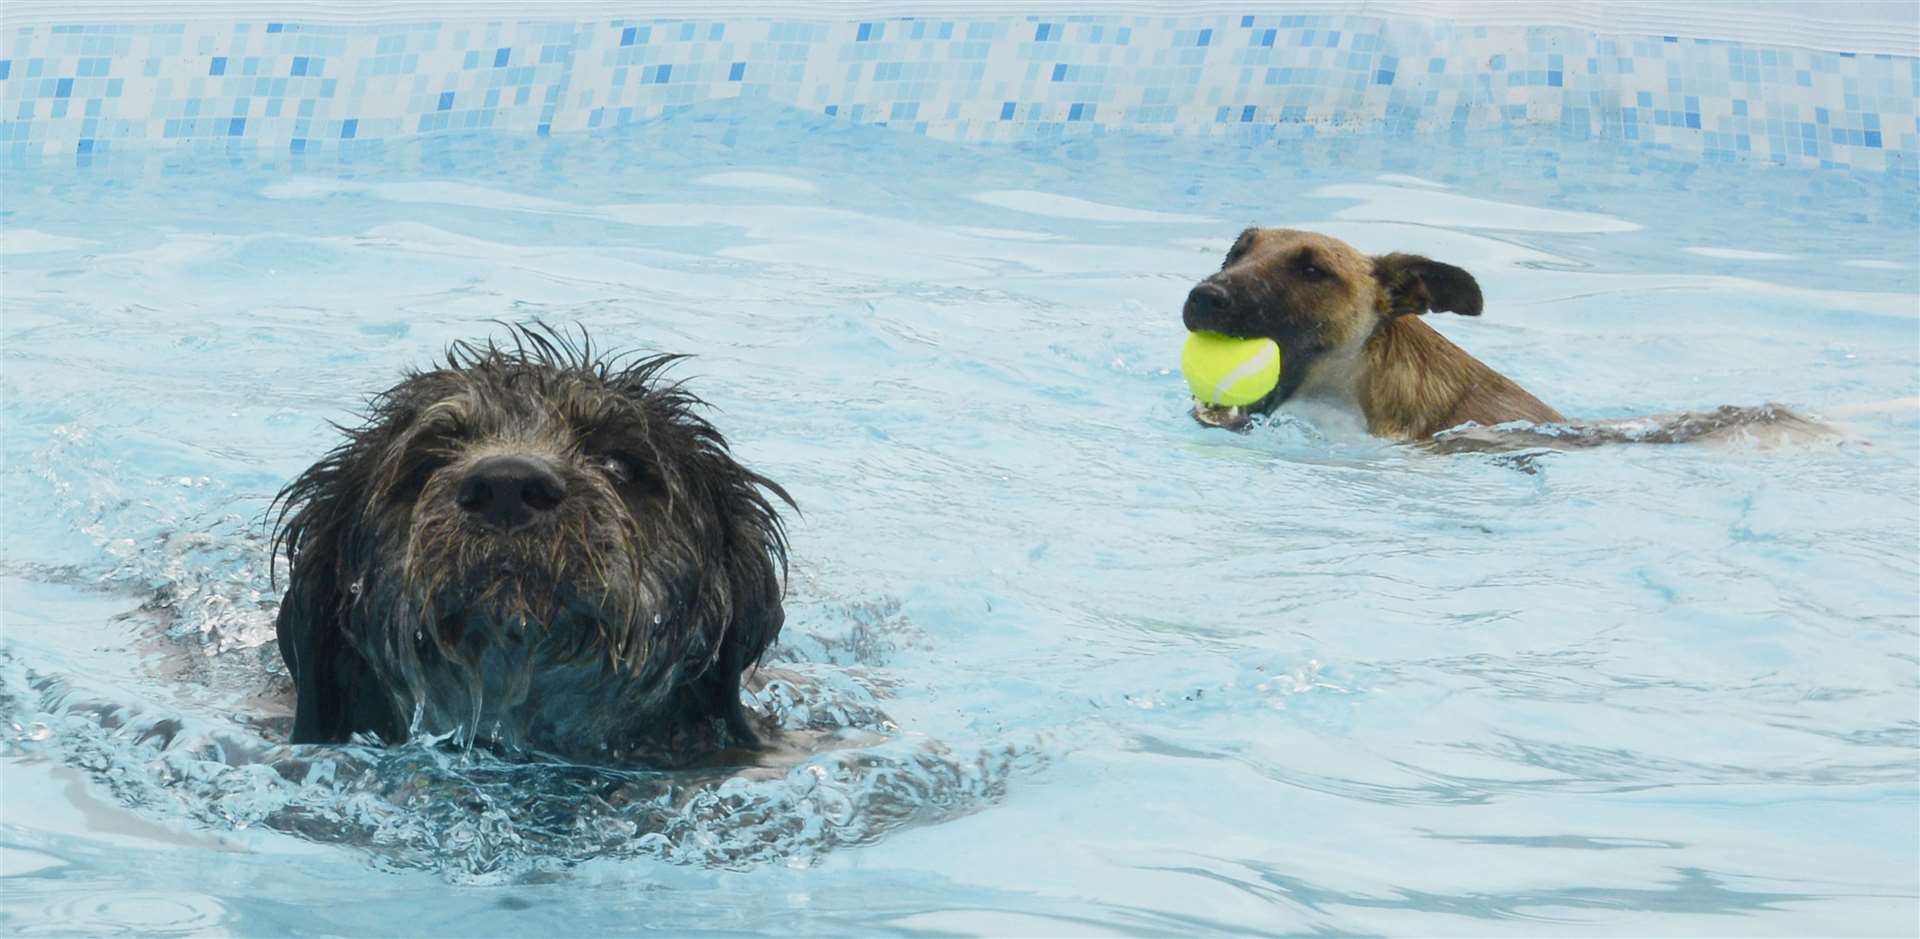 Island Dog ‘n’ Splash is a pool just for pooches